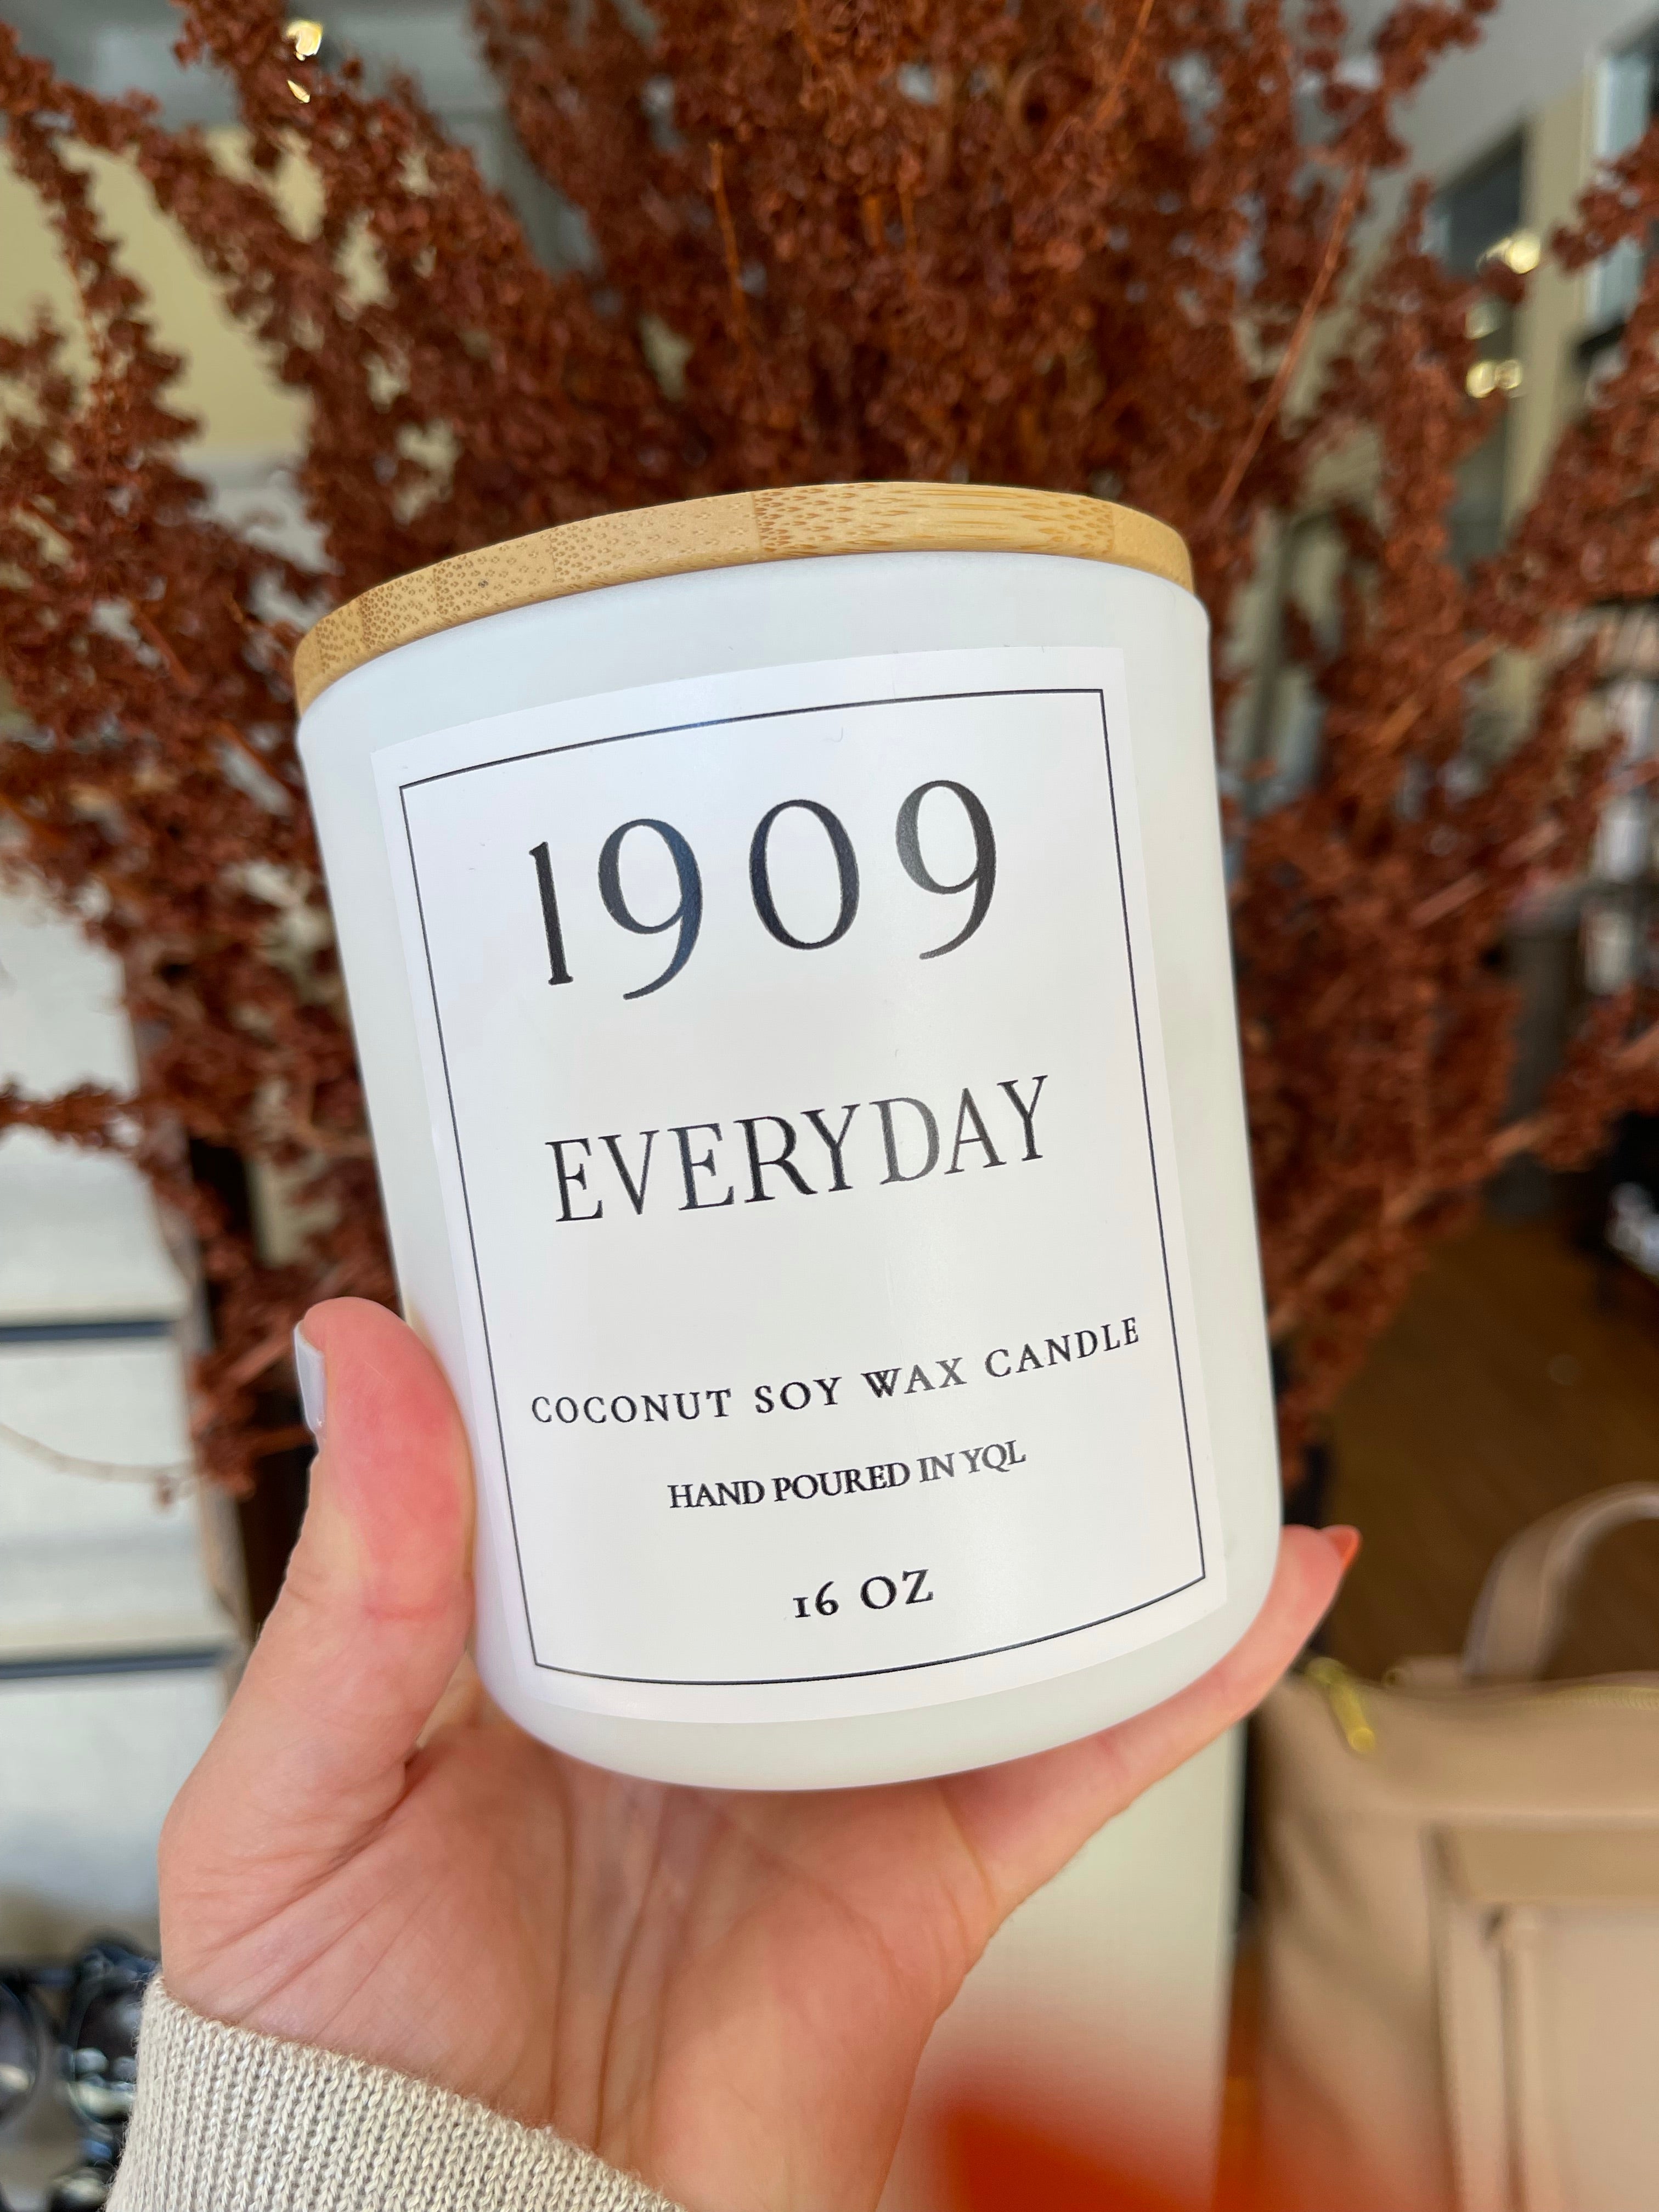 1909 Everyday Candle